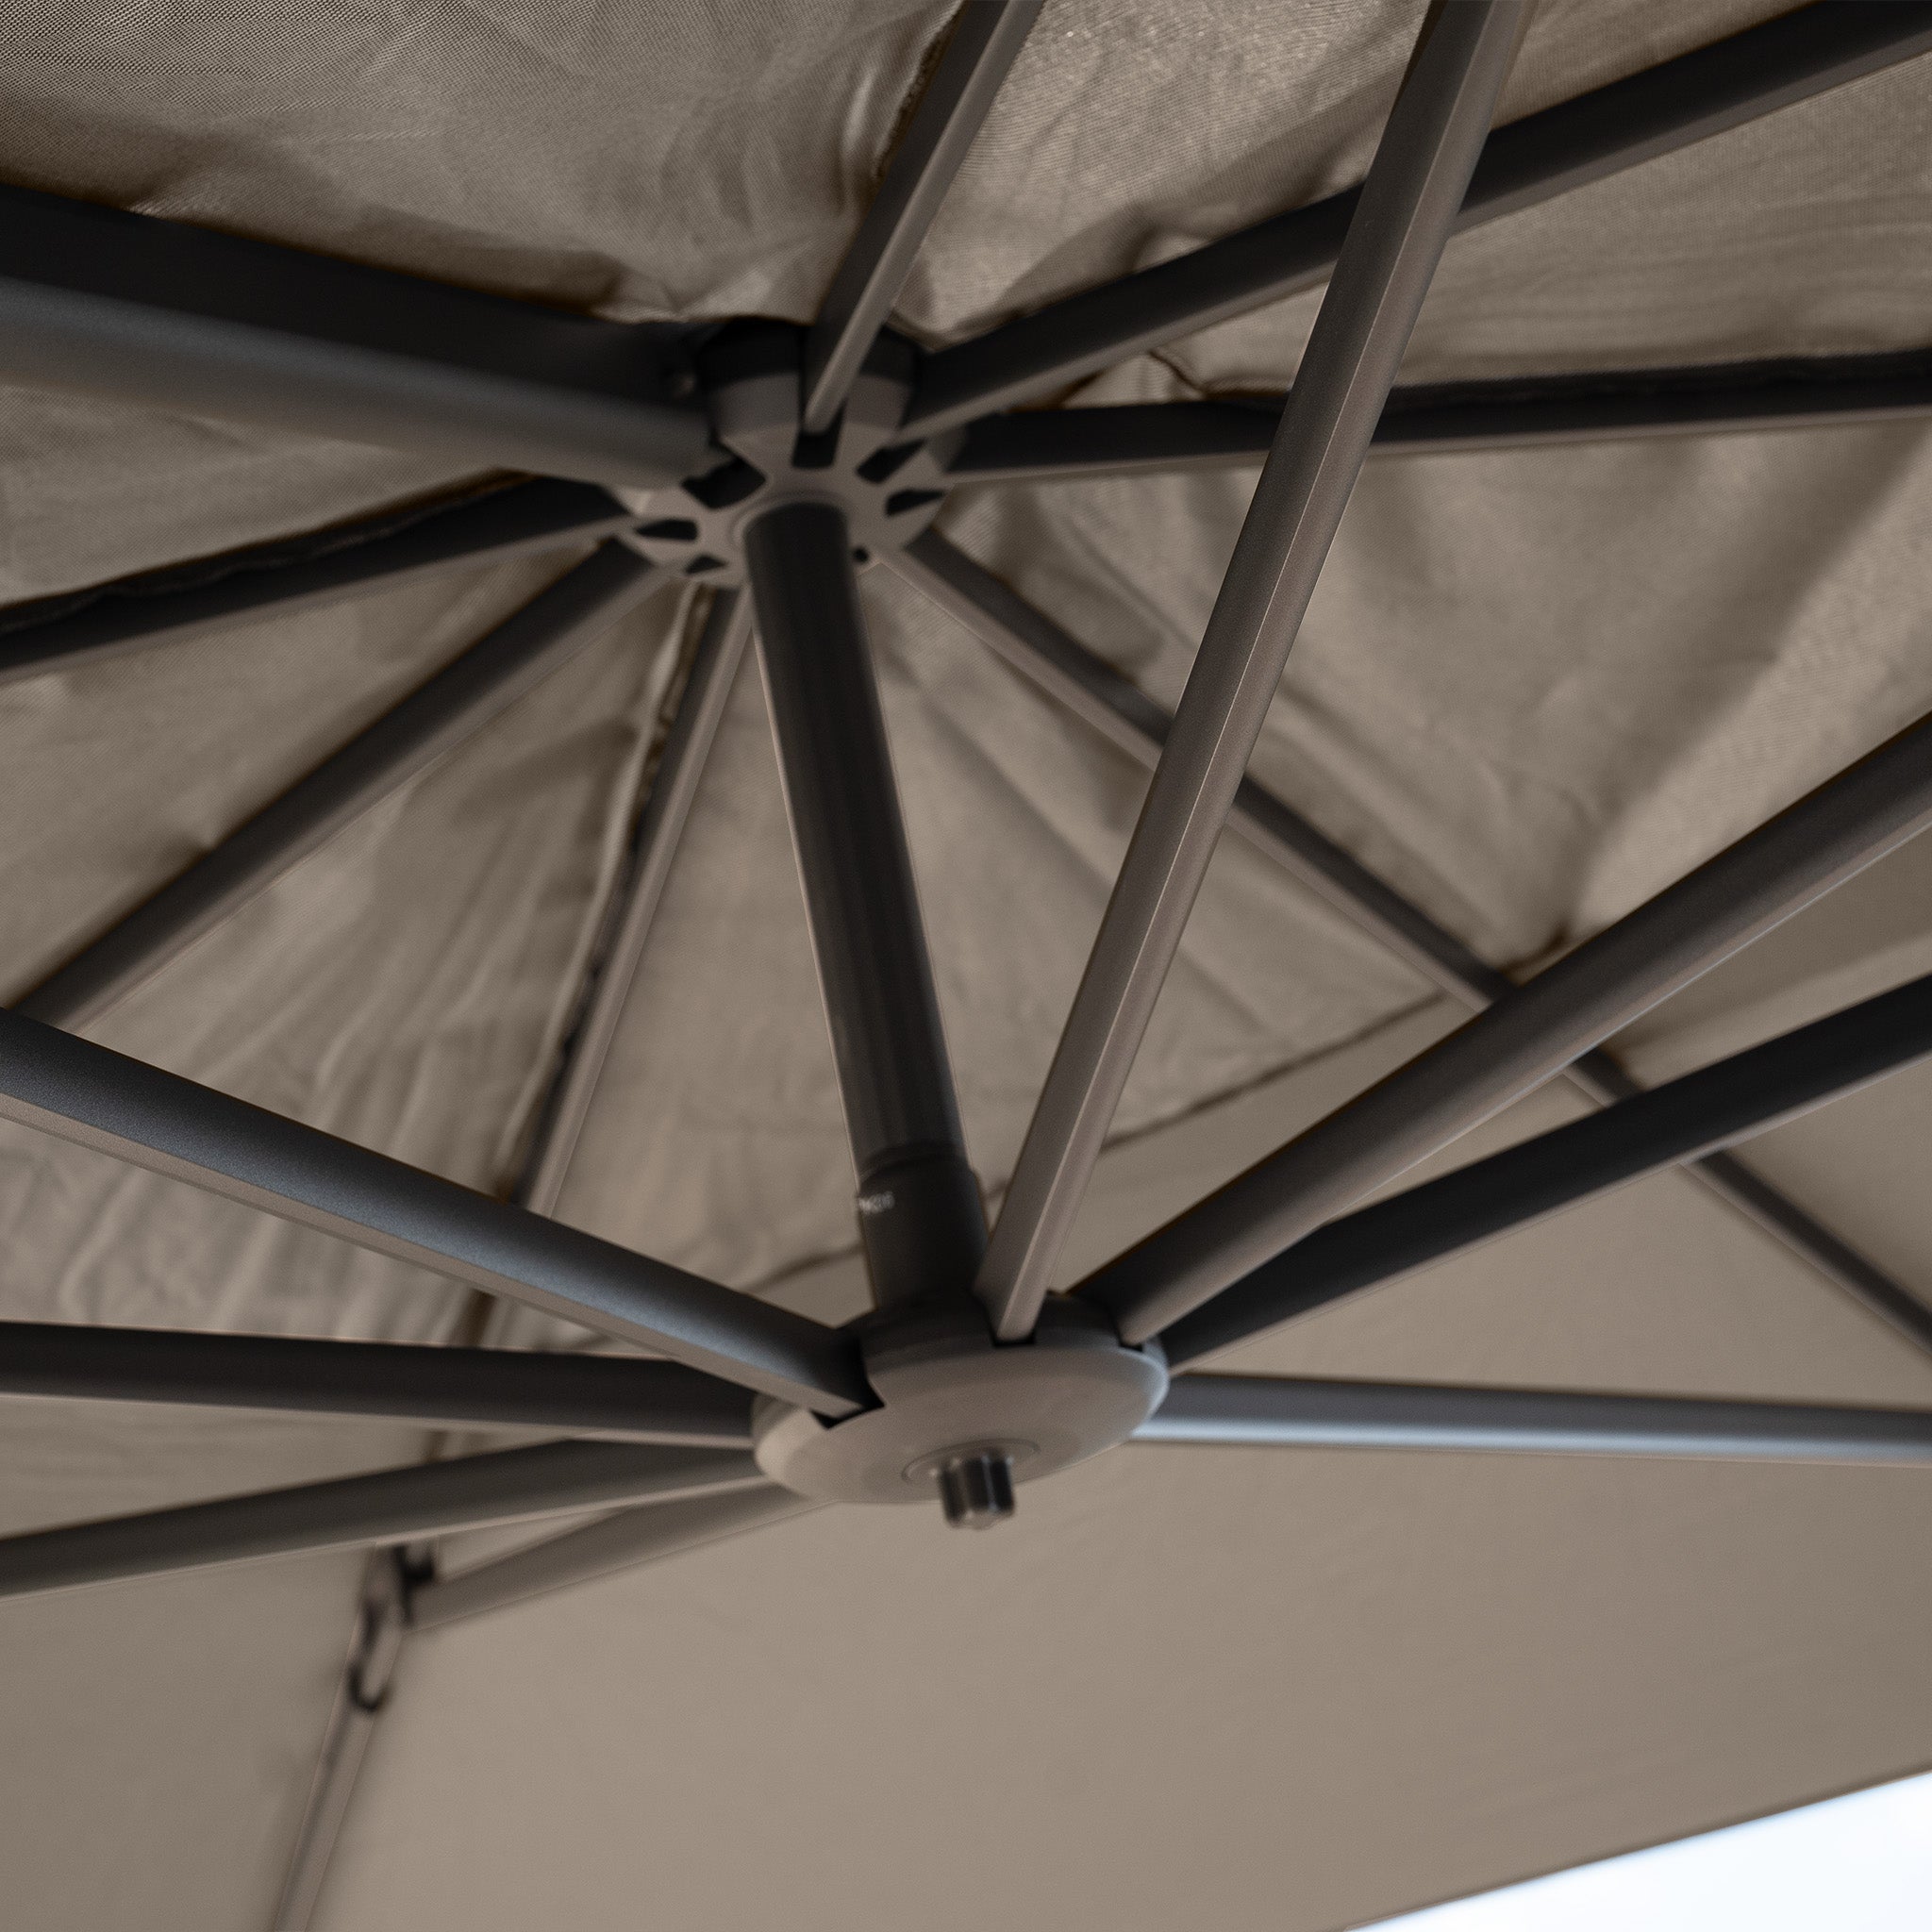 Hacienda 3m x 4m Cantilever Parasol With Granite Base & Cover in Taupe